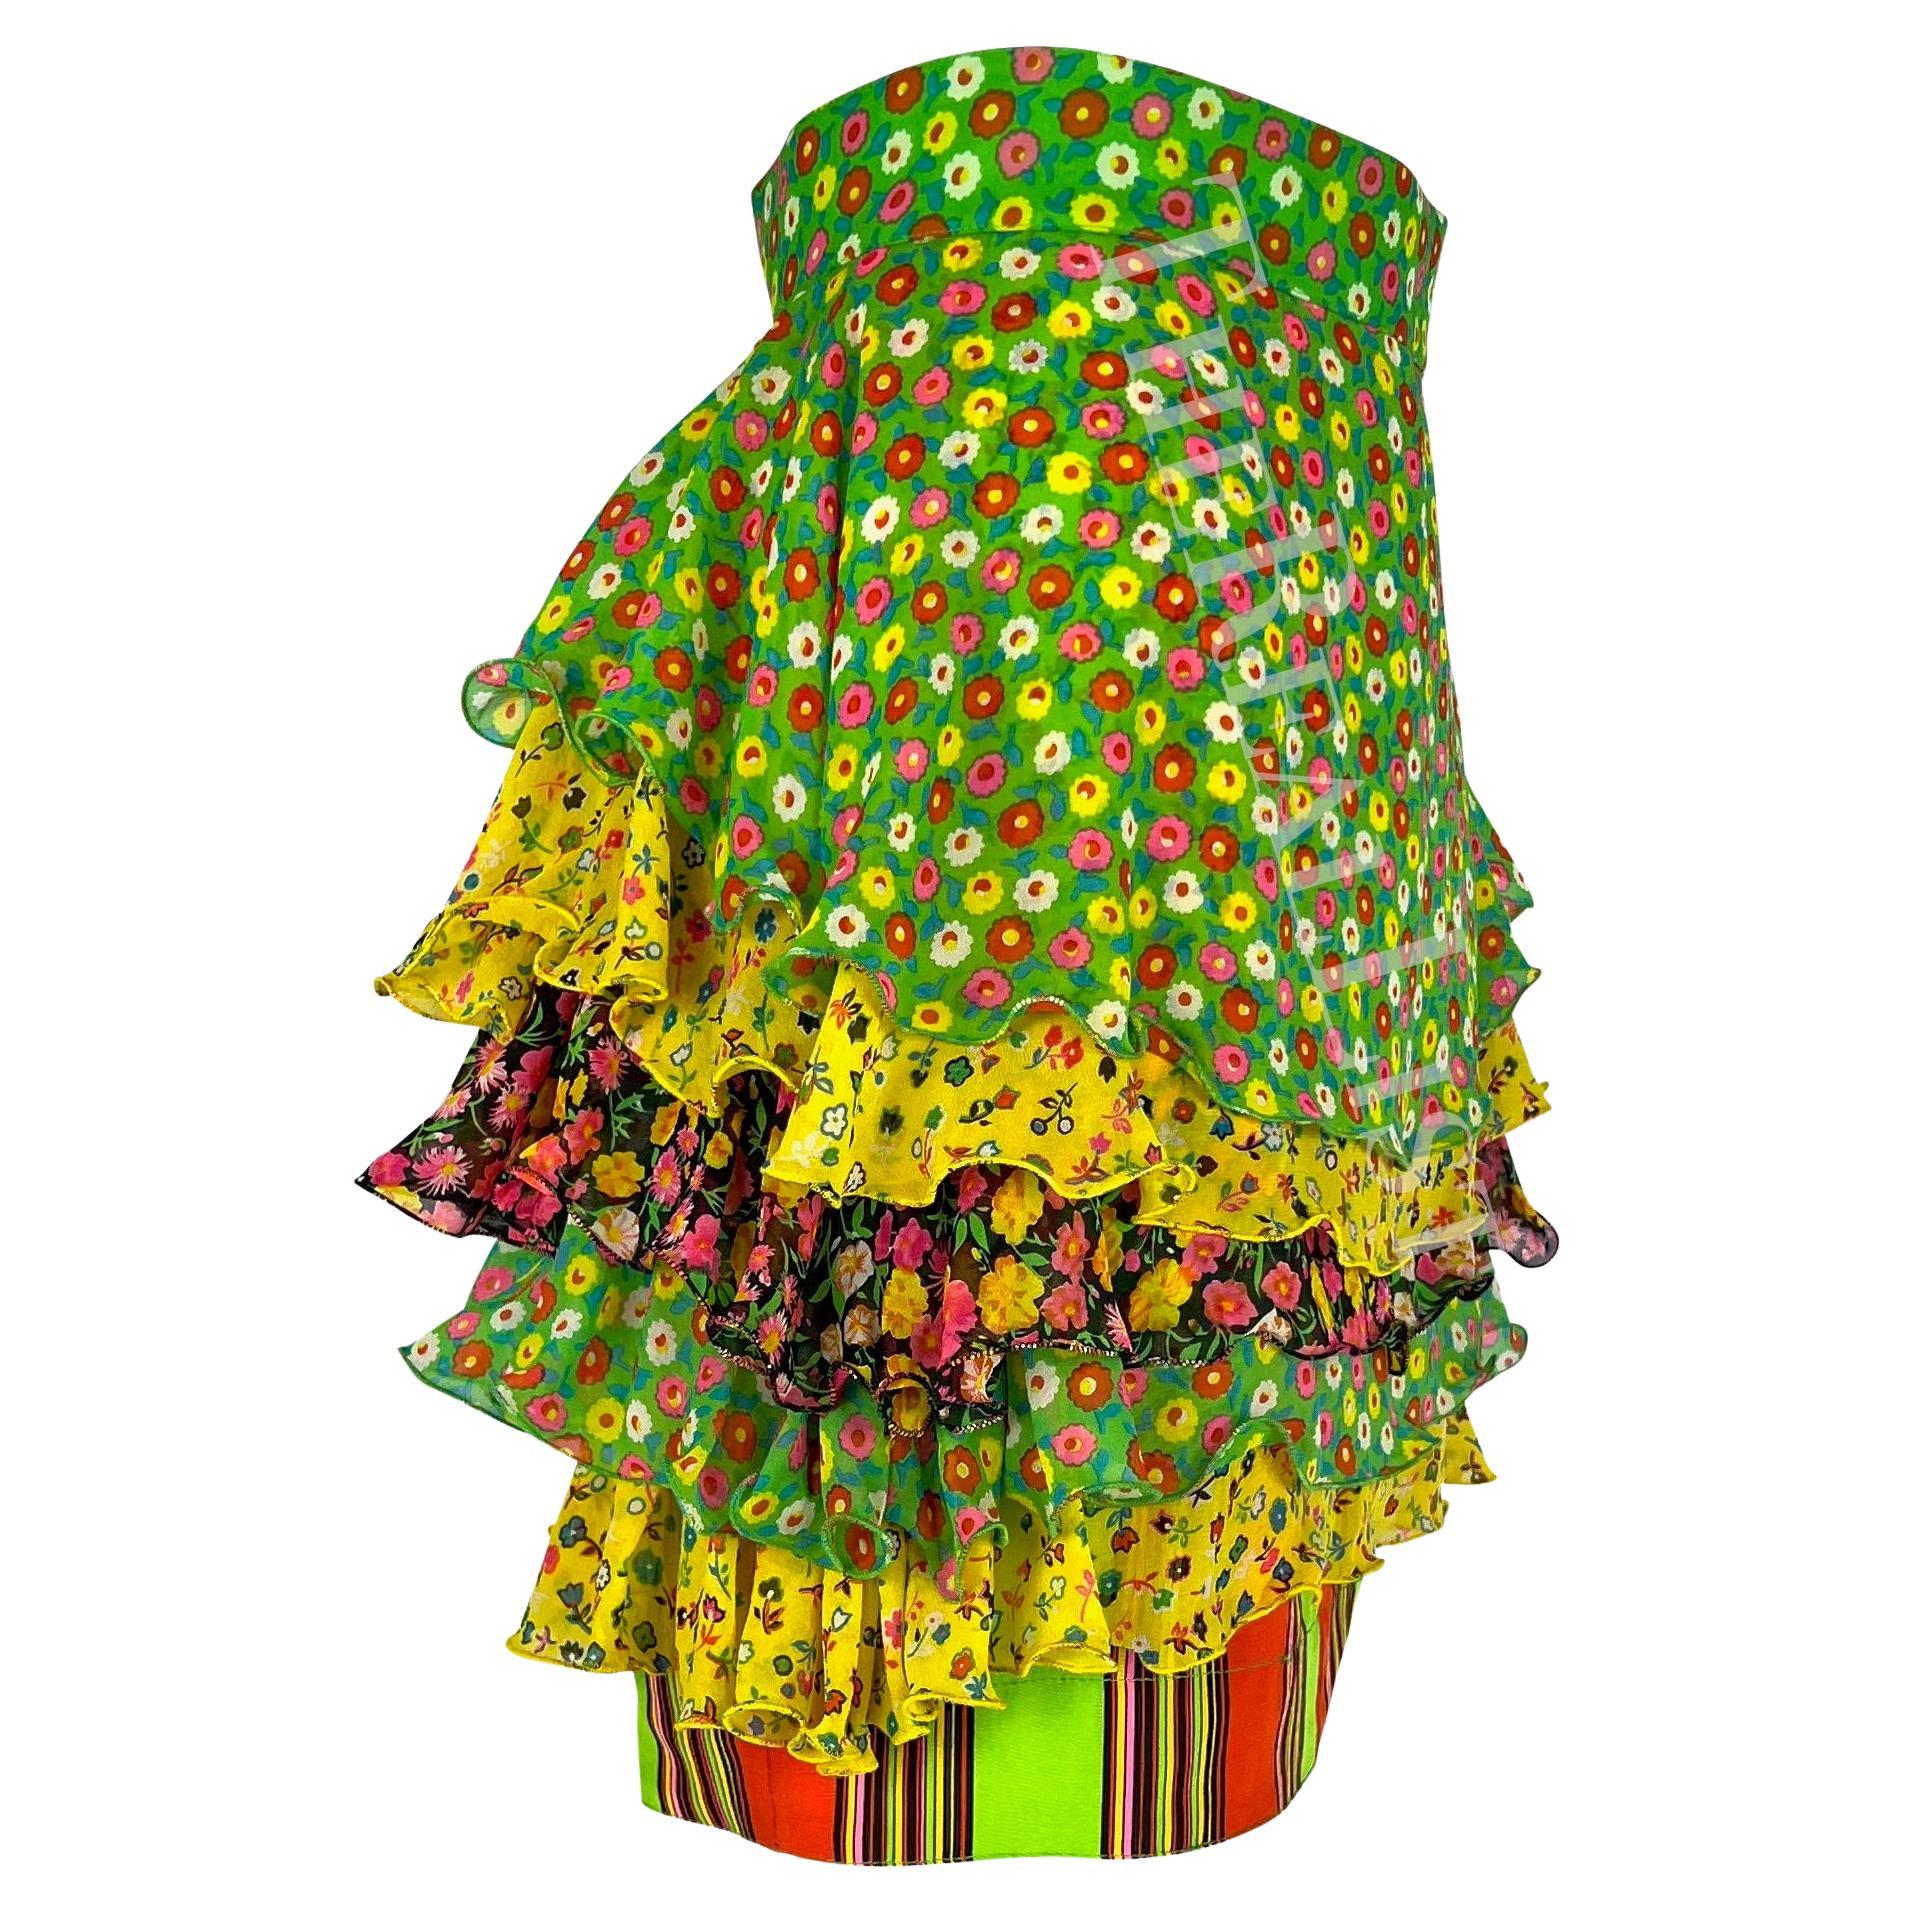 S/S 1993 Gianni Versace Tiered Floral Multicolor Runway Mini Skirt For Sale 2